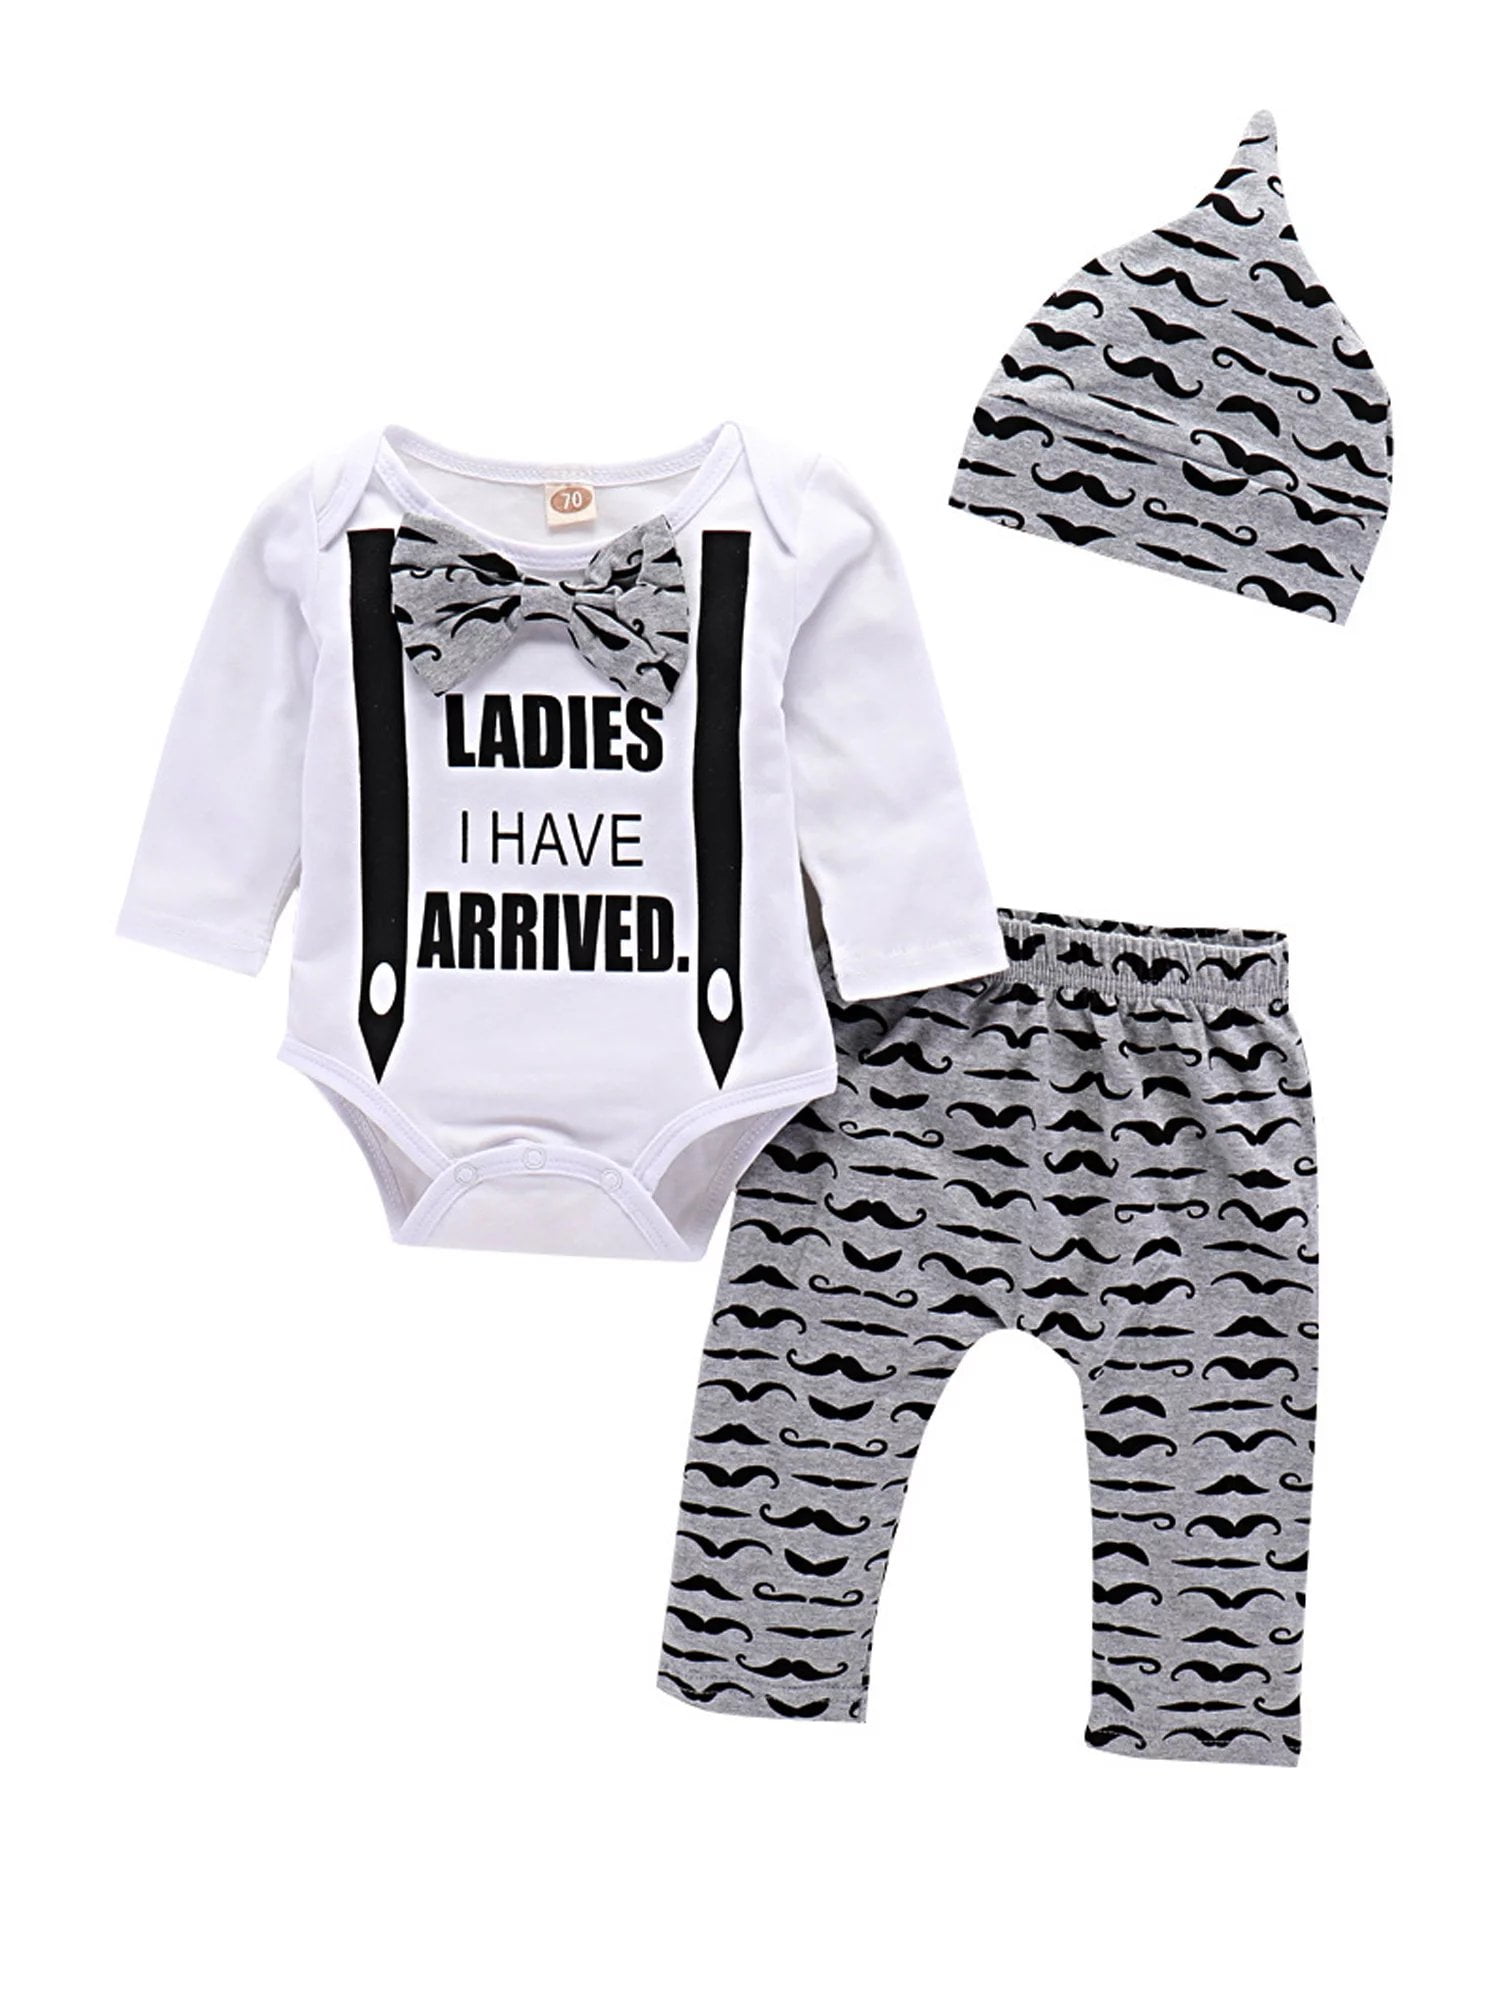 LAPAKIDS Newborn Baby Boy Outfits Bow-tie Tops Romper+Long pants+Hat ...